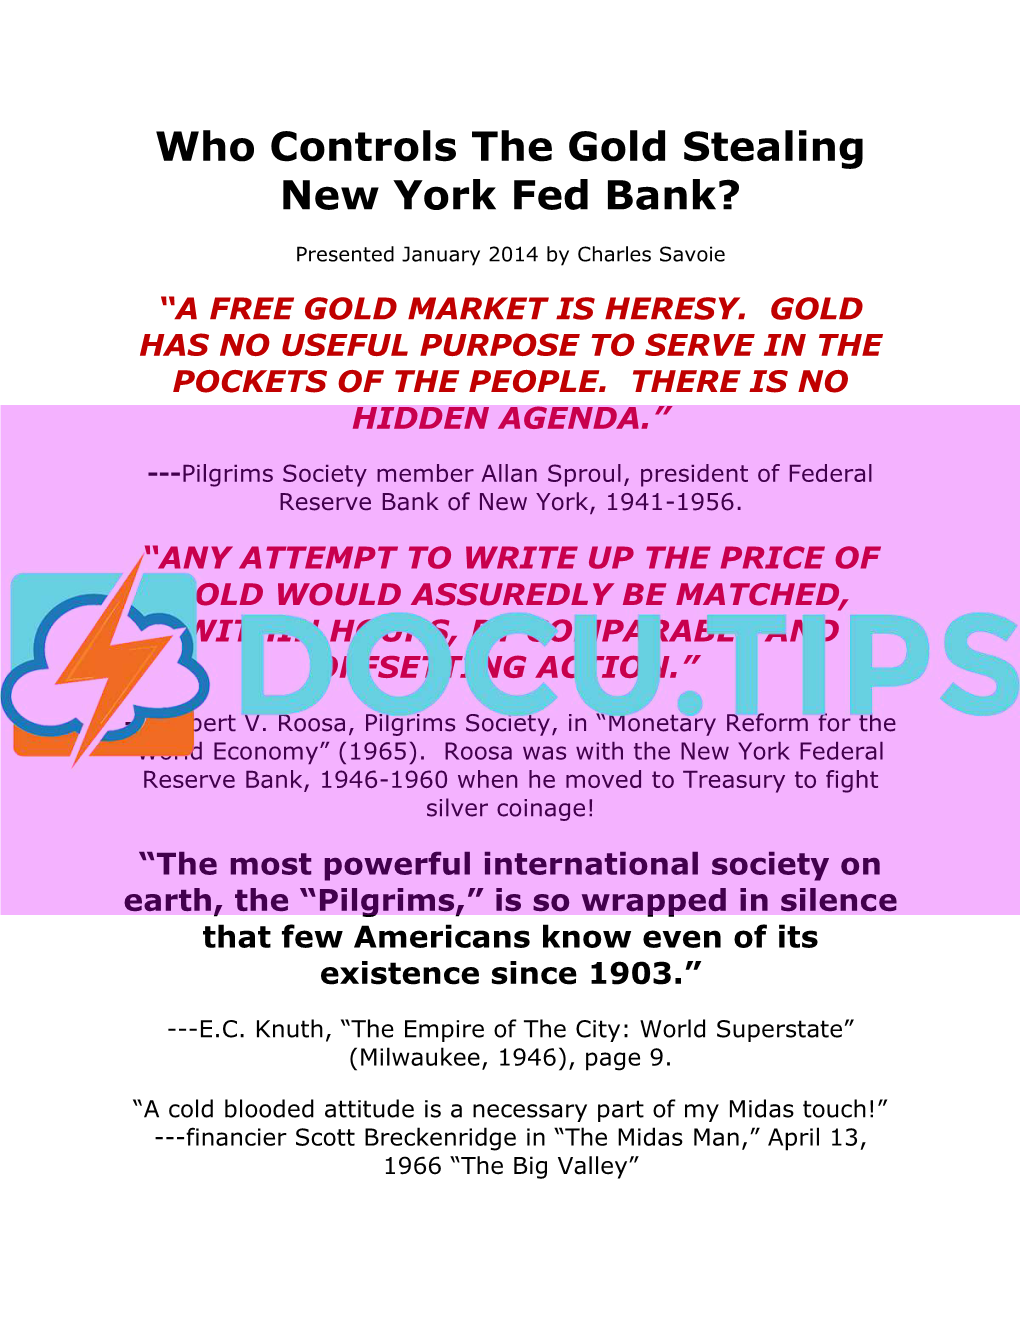 Who Controls the Gold Stealing New York Fed Bank?